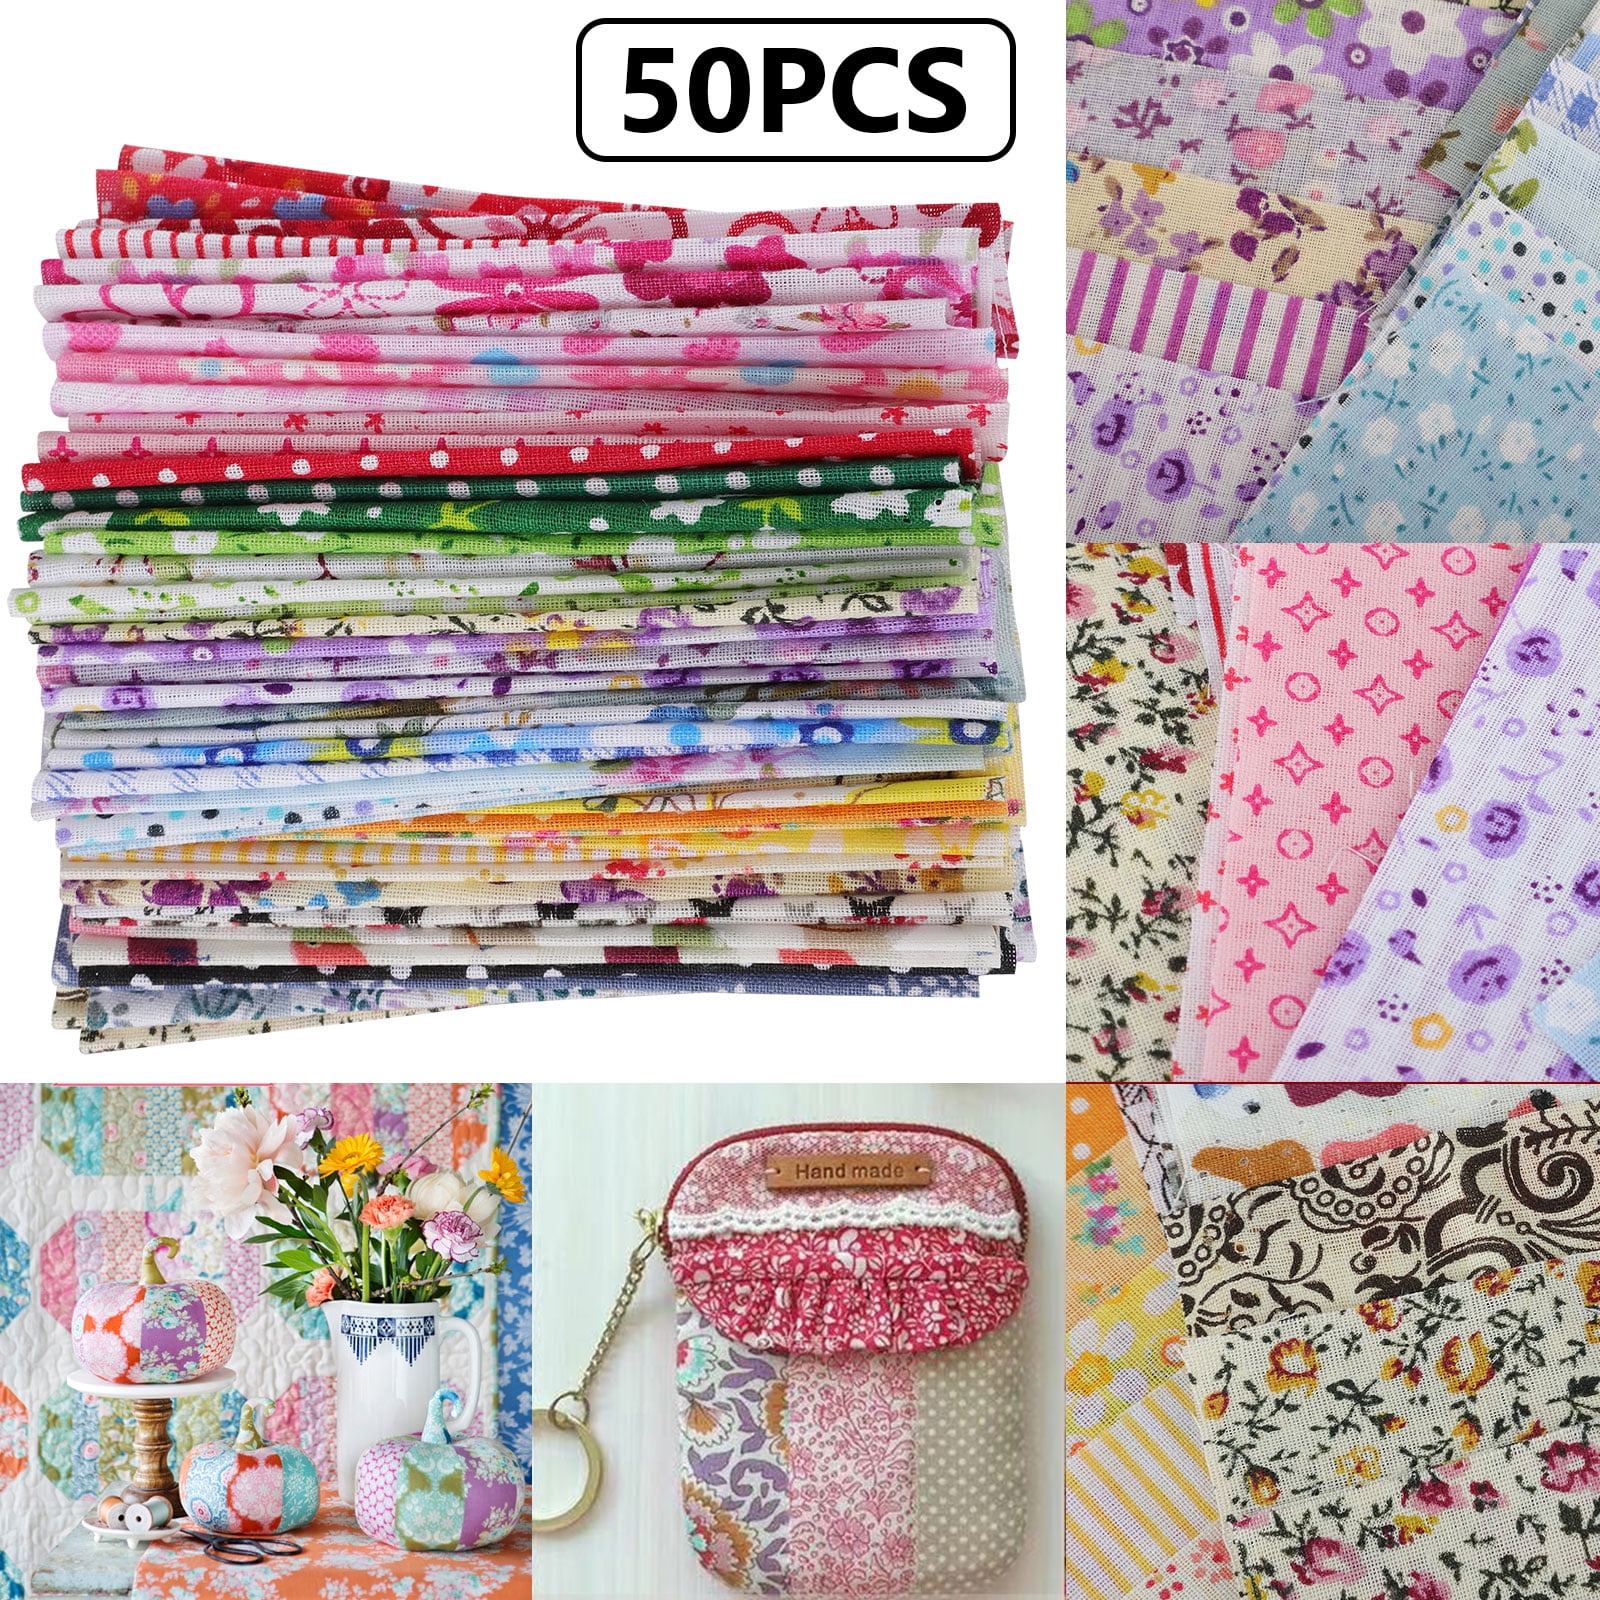 50PCS 100%Cotton Floral Fabric Vintage Style Floral Dress Craft Material Sewing 